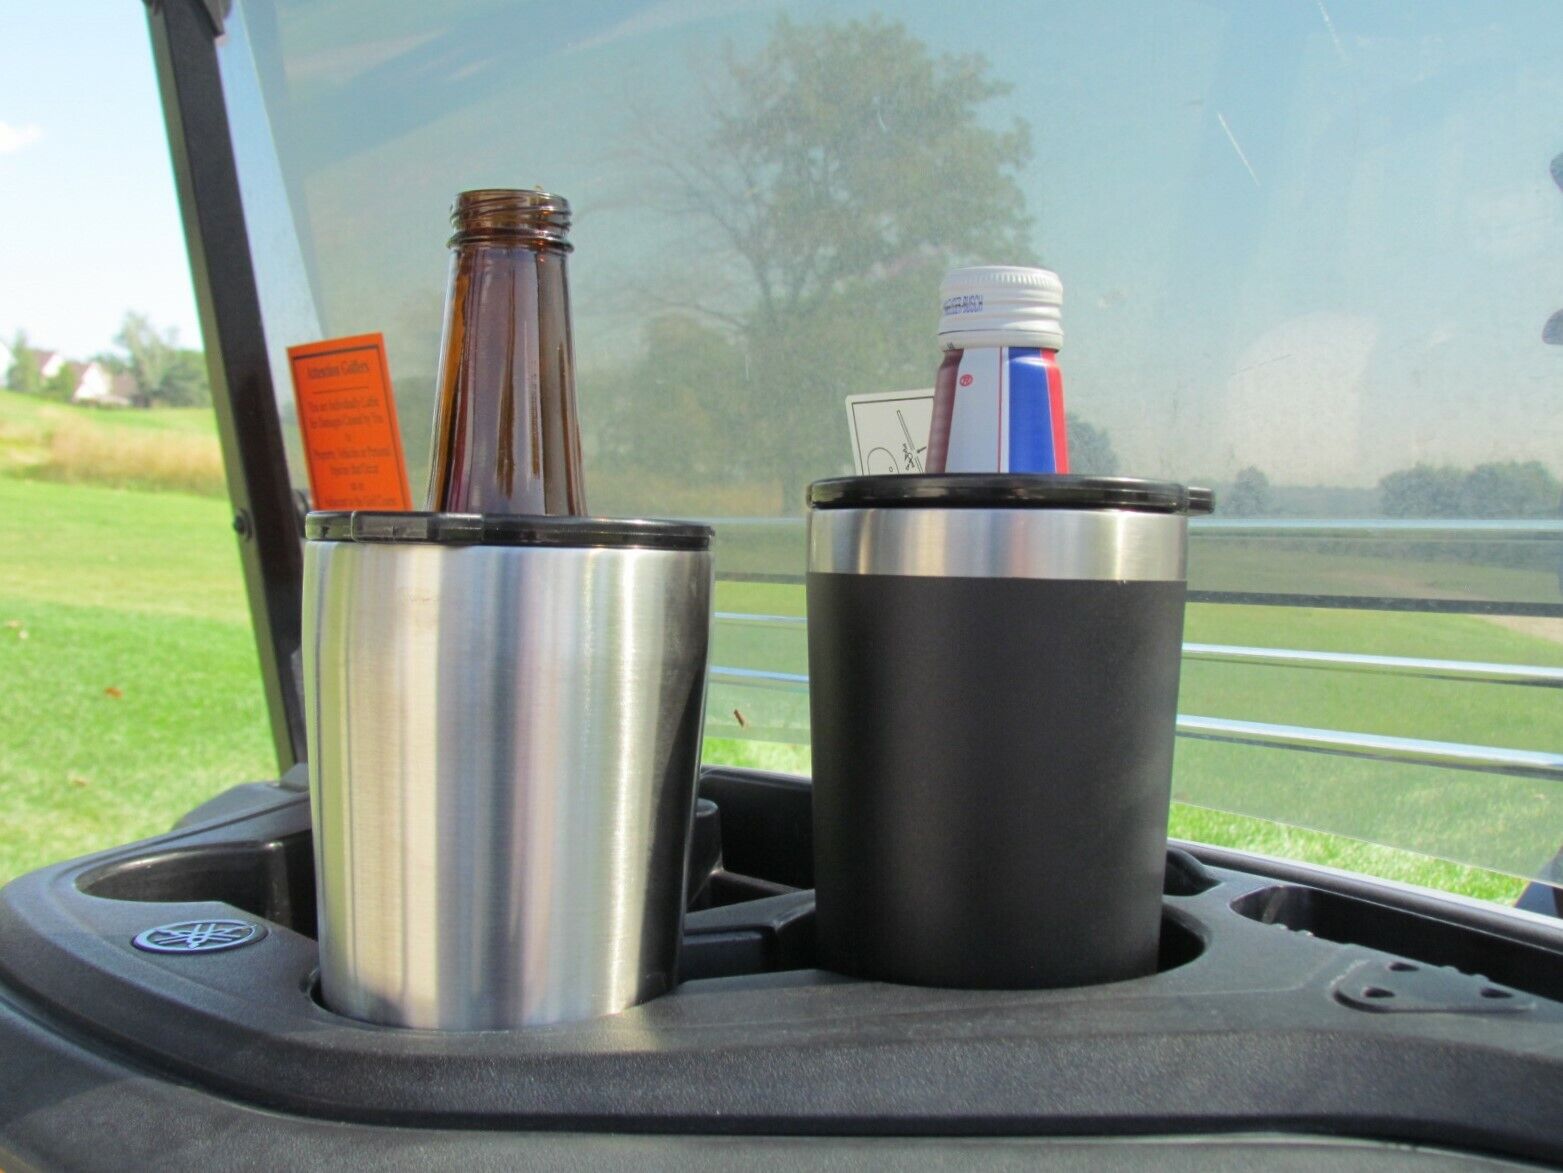 Convert your 20 oz. stainless steel tumbler into a holder for cans or bottles